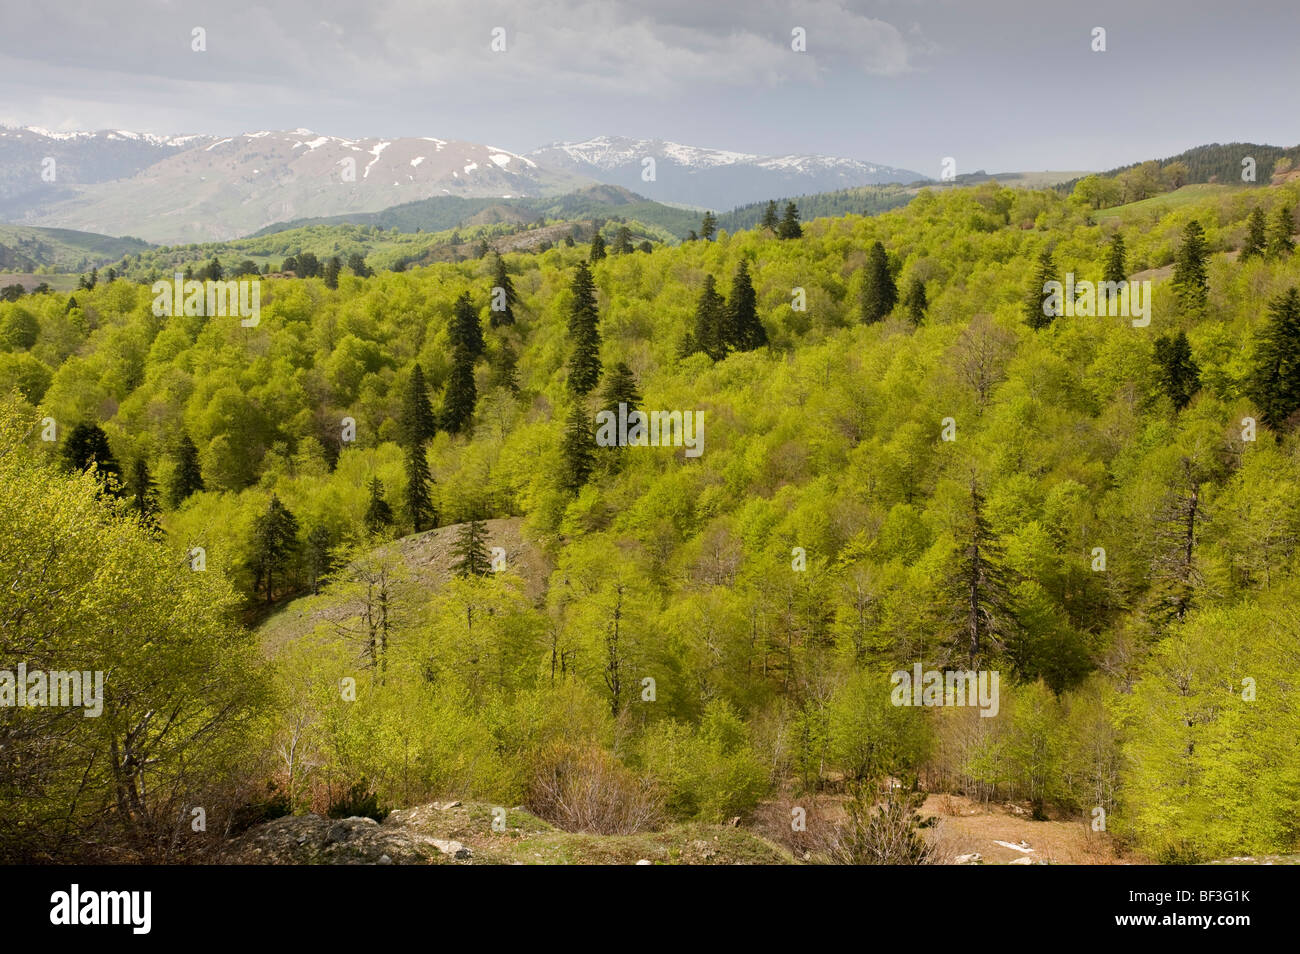 The central Pindos Mountains in spring, looking north from the Katara Pass over forests of Beech and Greek Fir; north Greece. Stock Photo